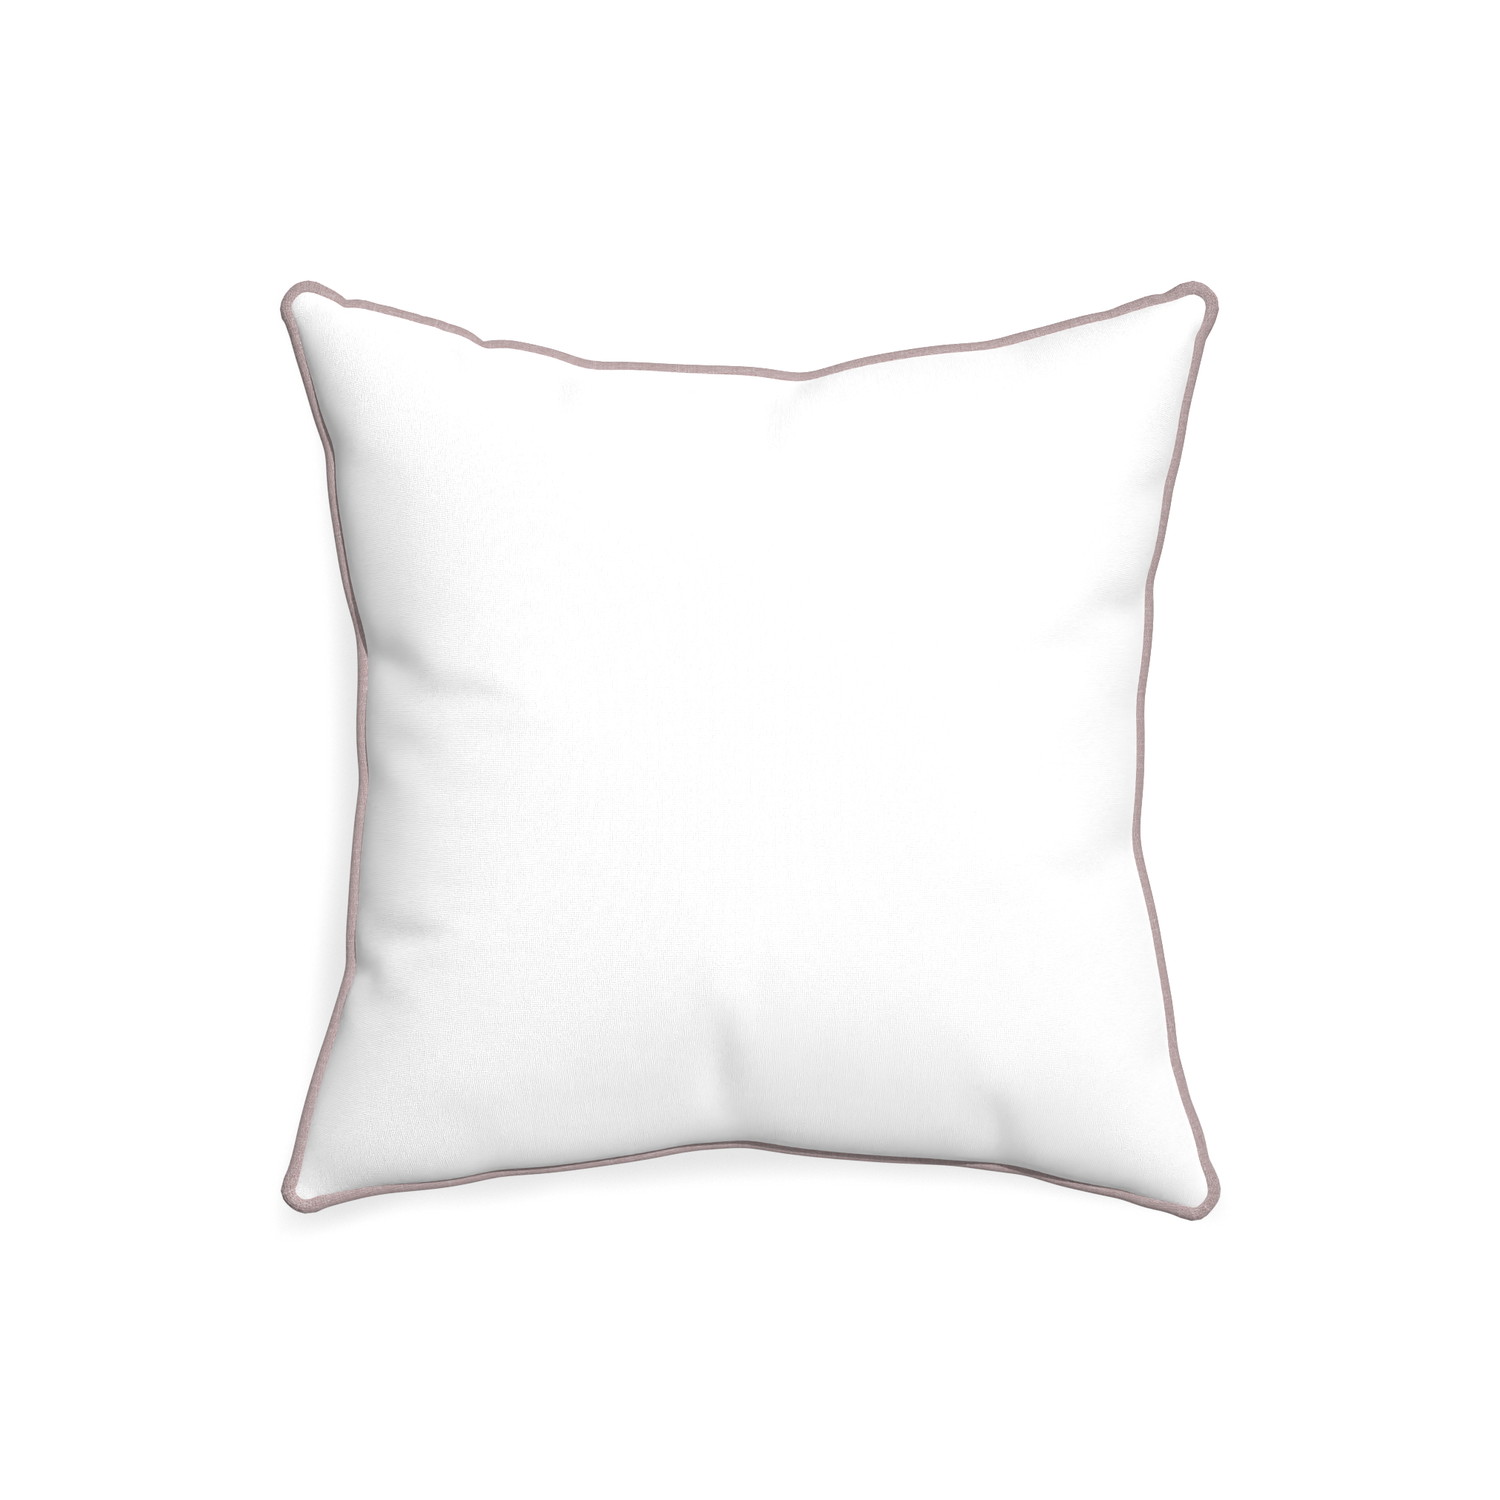 20-square snow custom white cottonpillow with orchid piping on white background